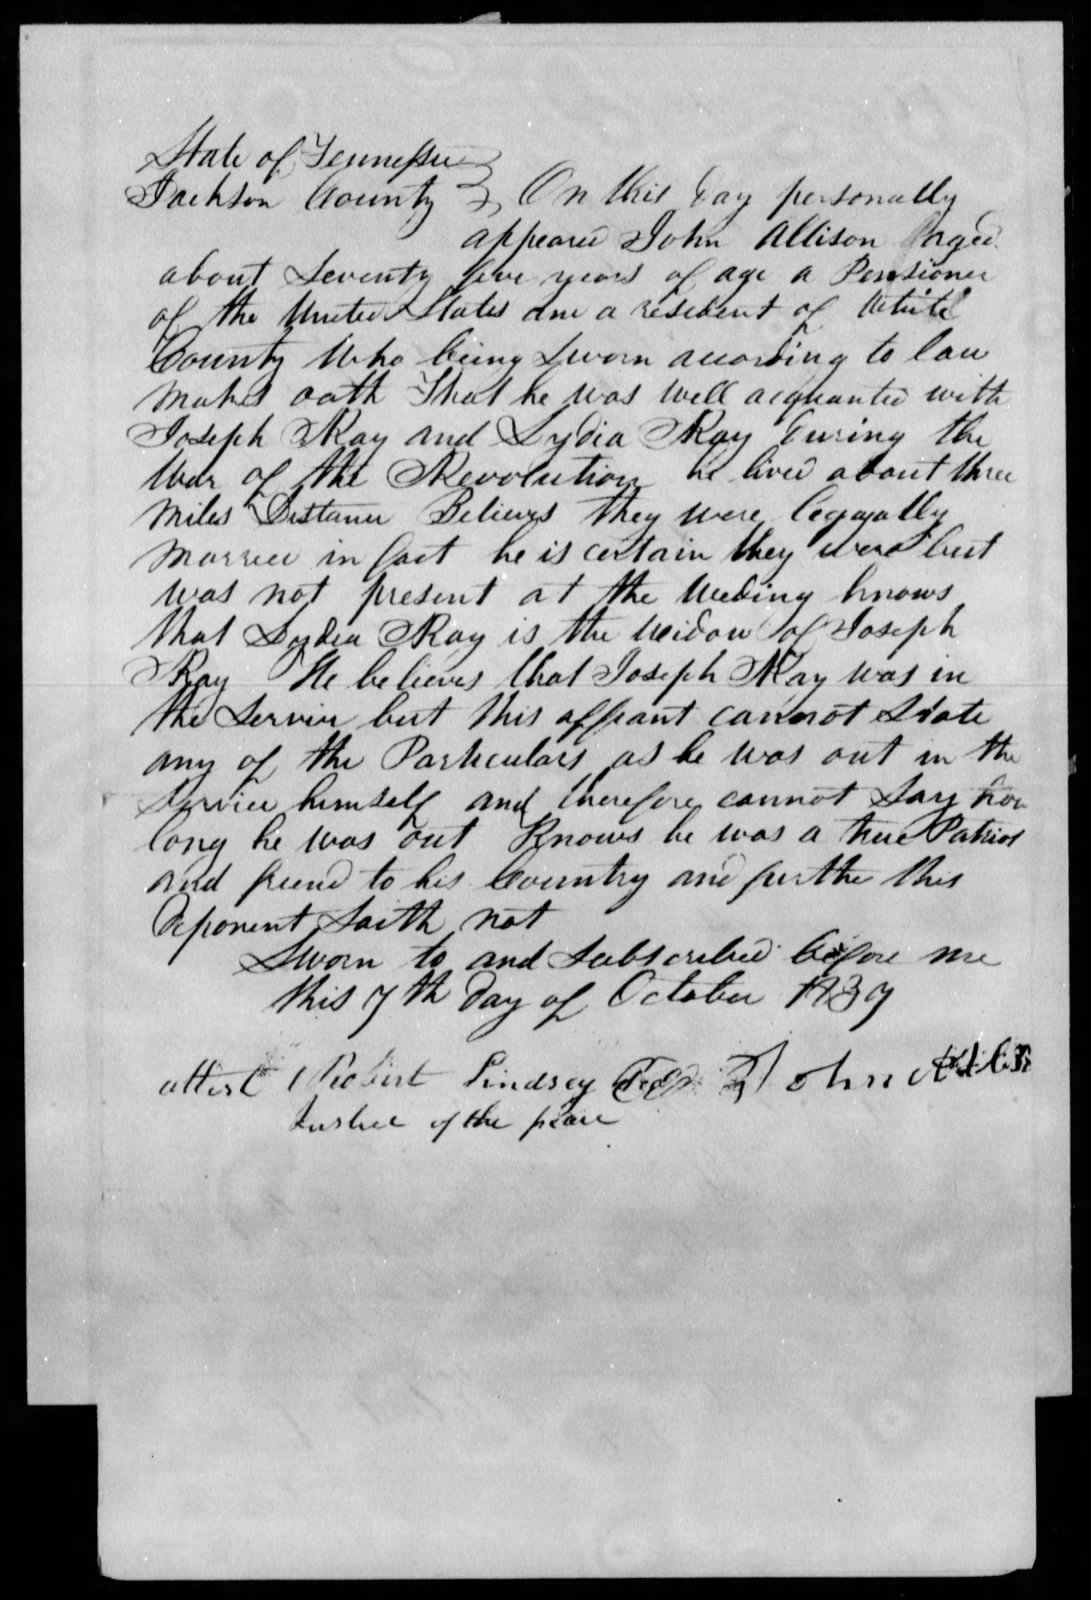 Affidavit of John Allison in support of a Pension Claim for Lydia Ray, 7 October 1837